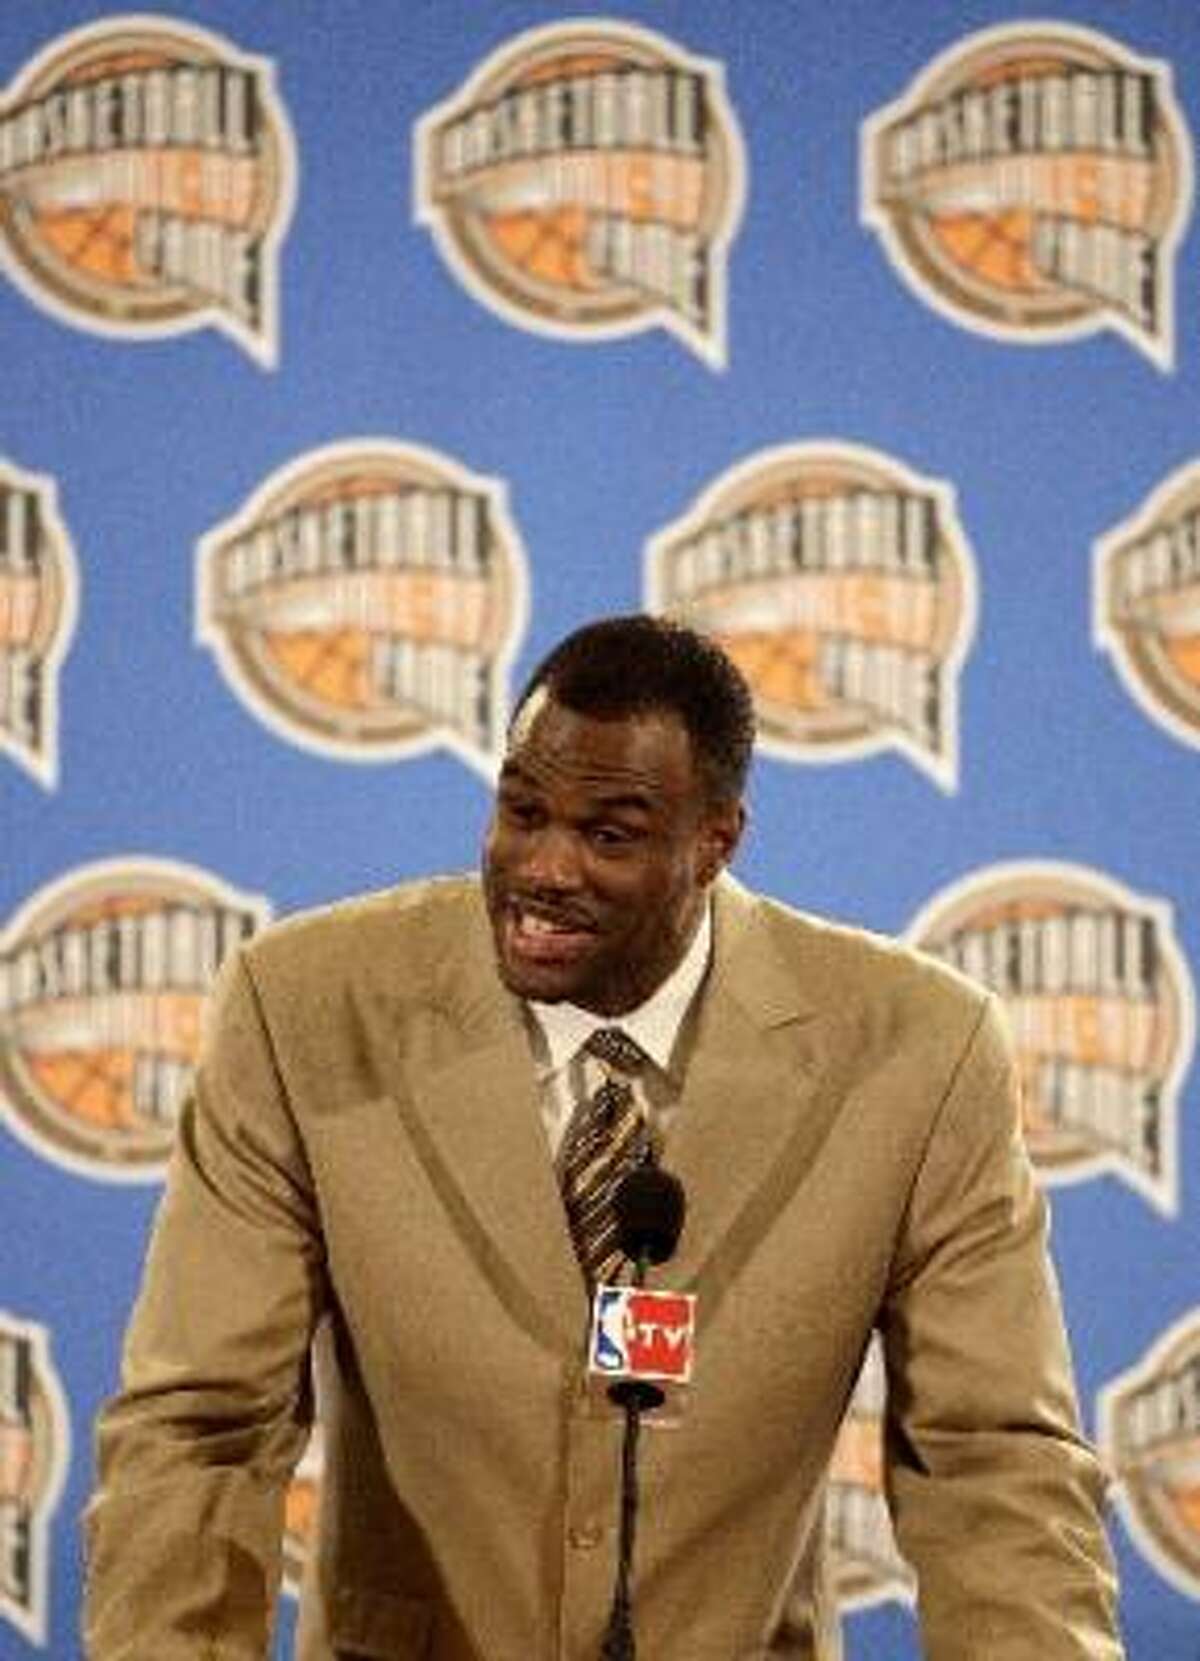 David Robinson Robinson played 14 years in the NBA, all with the San Antonio Spurs. The rangy center averaged 21.1 points per game, 10.6 rebounds and 3 blocks a game for his career.